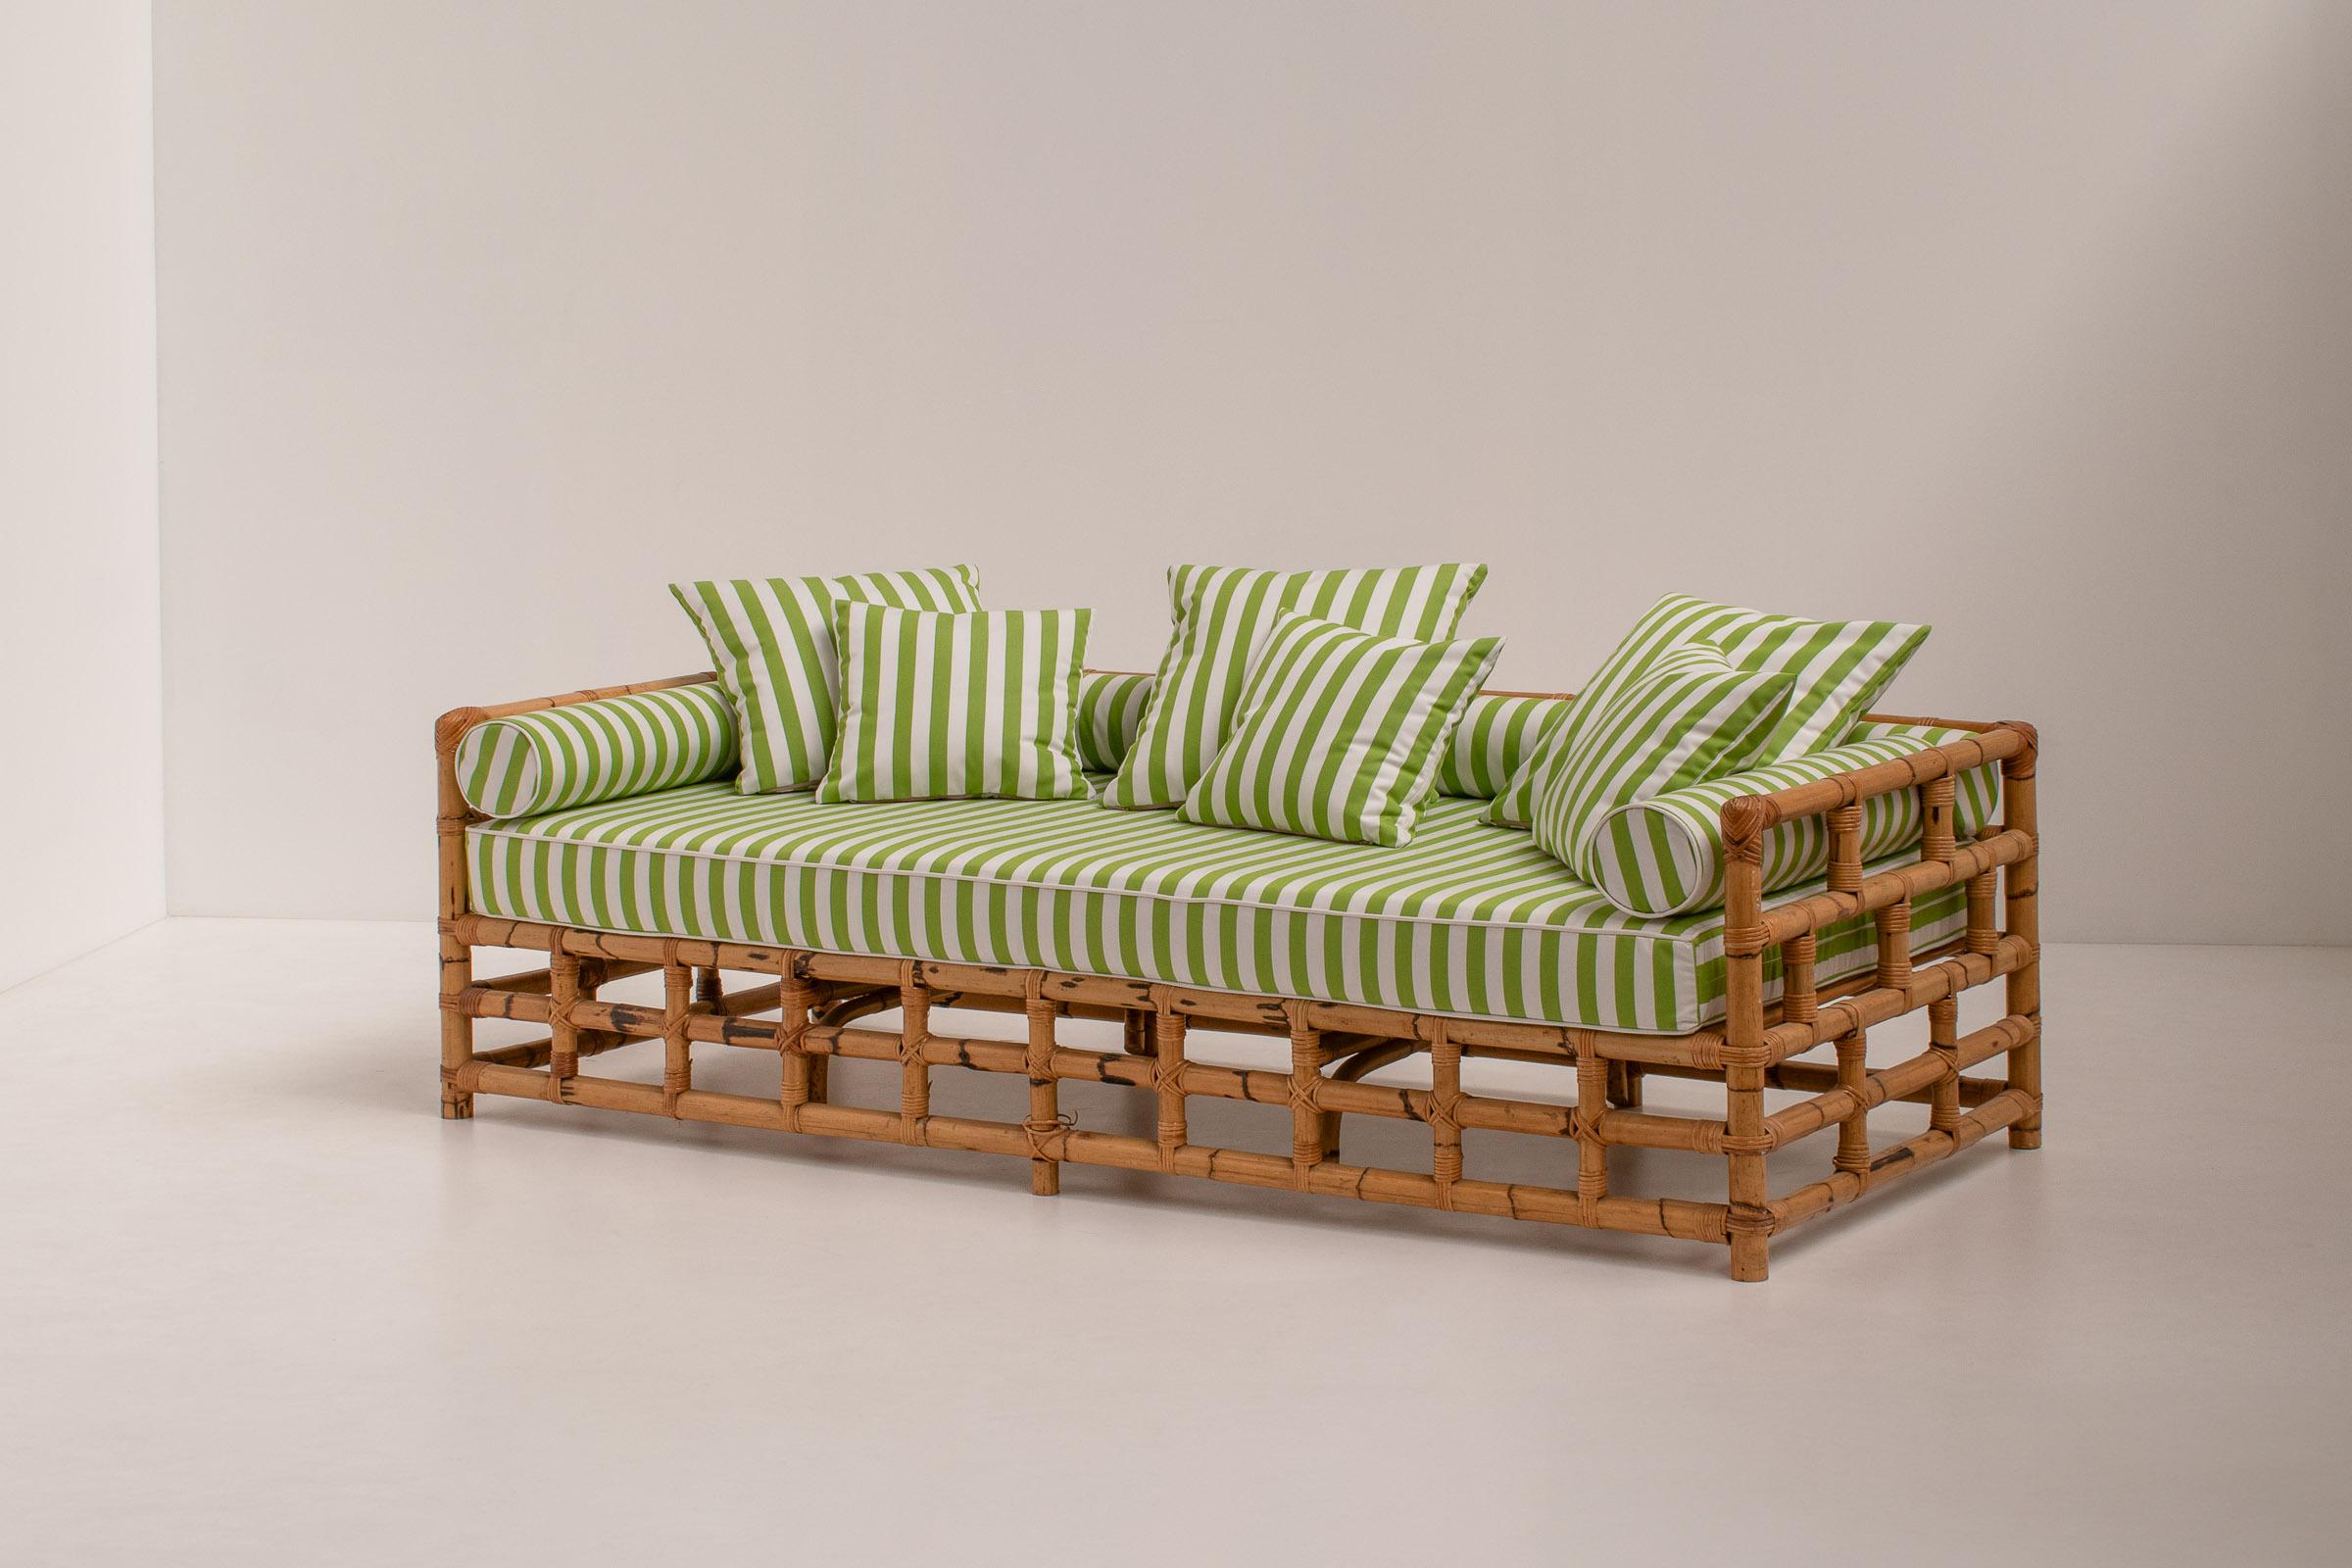 Stunning bamboo daybed or sofa from the 1970s. Sourced in Italy. 

The open structure of the frame gives the sofa a very elegant feel and it makes it look beautiful from any angle. The striped upholstery gives a beautiful, tropical, and fun contrast